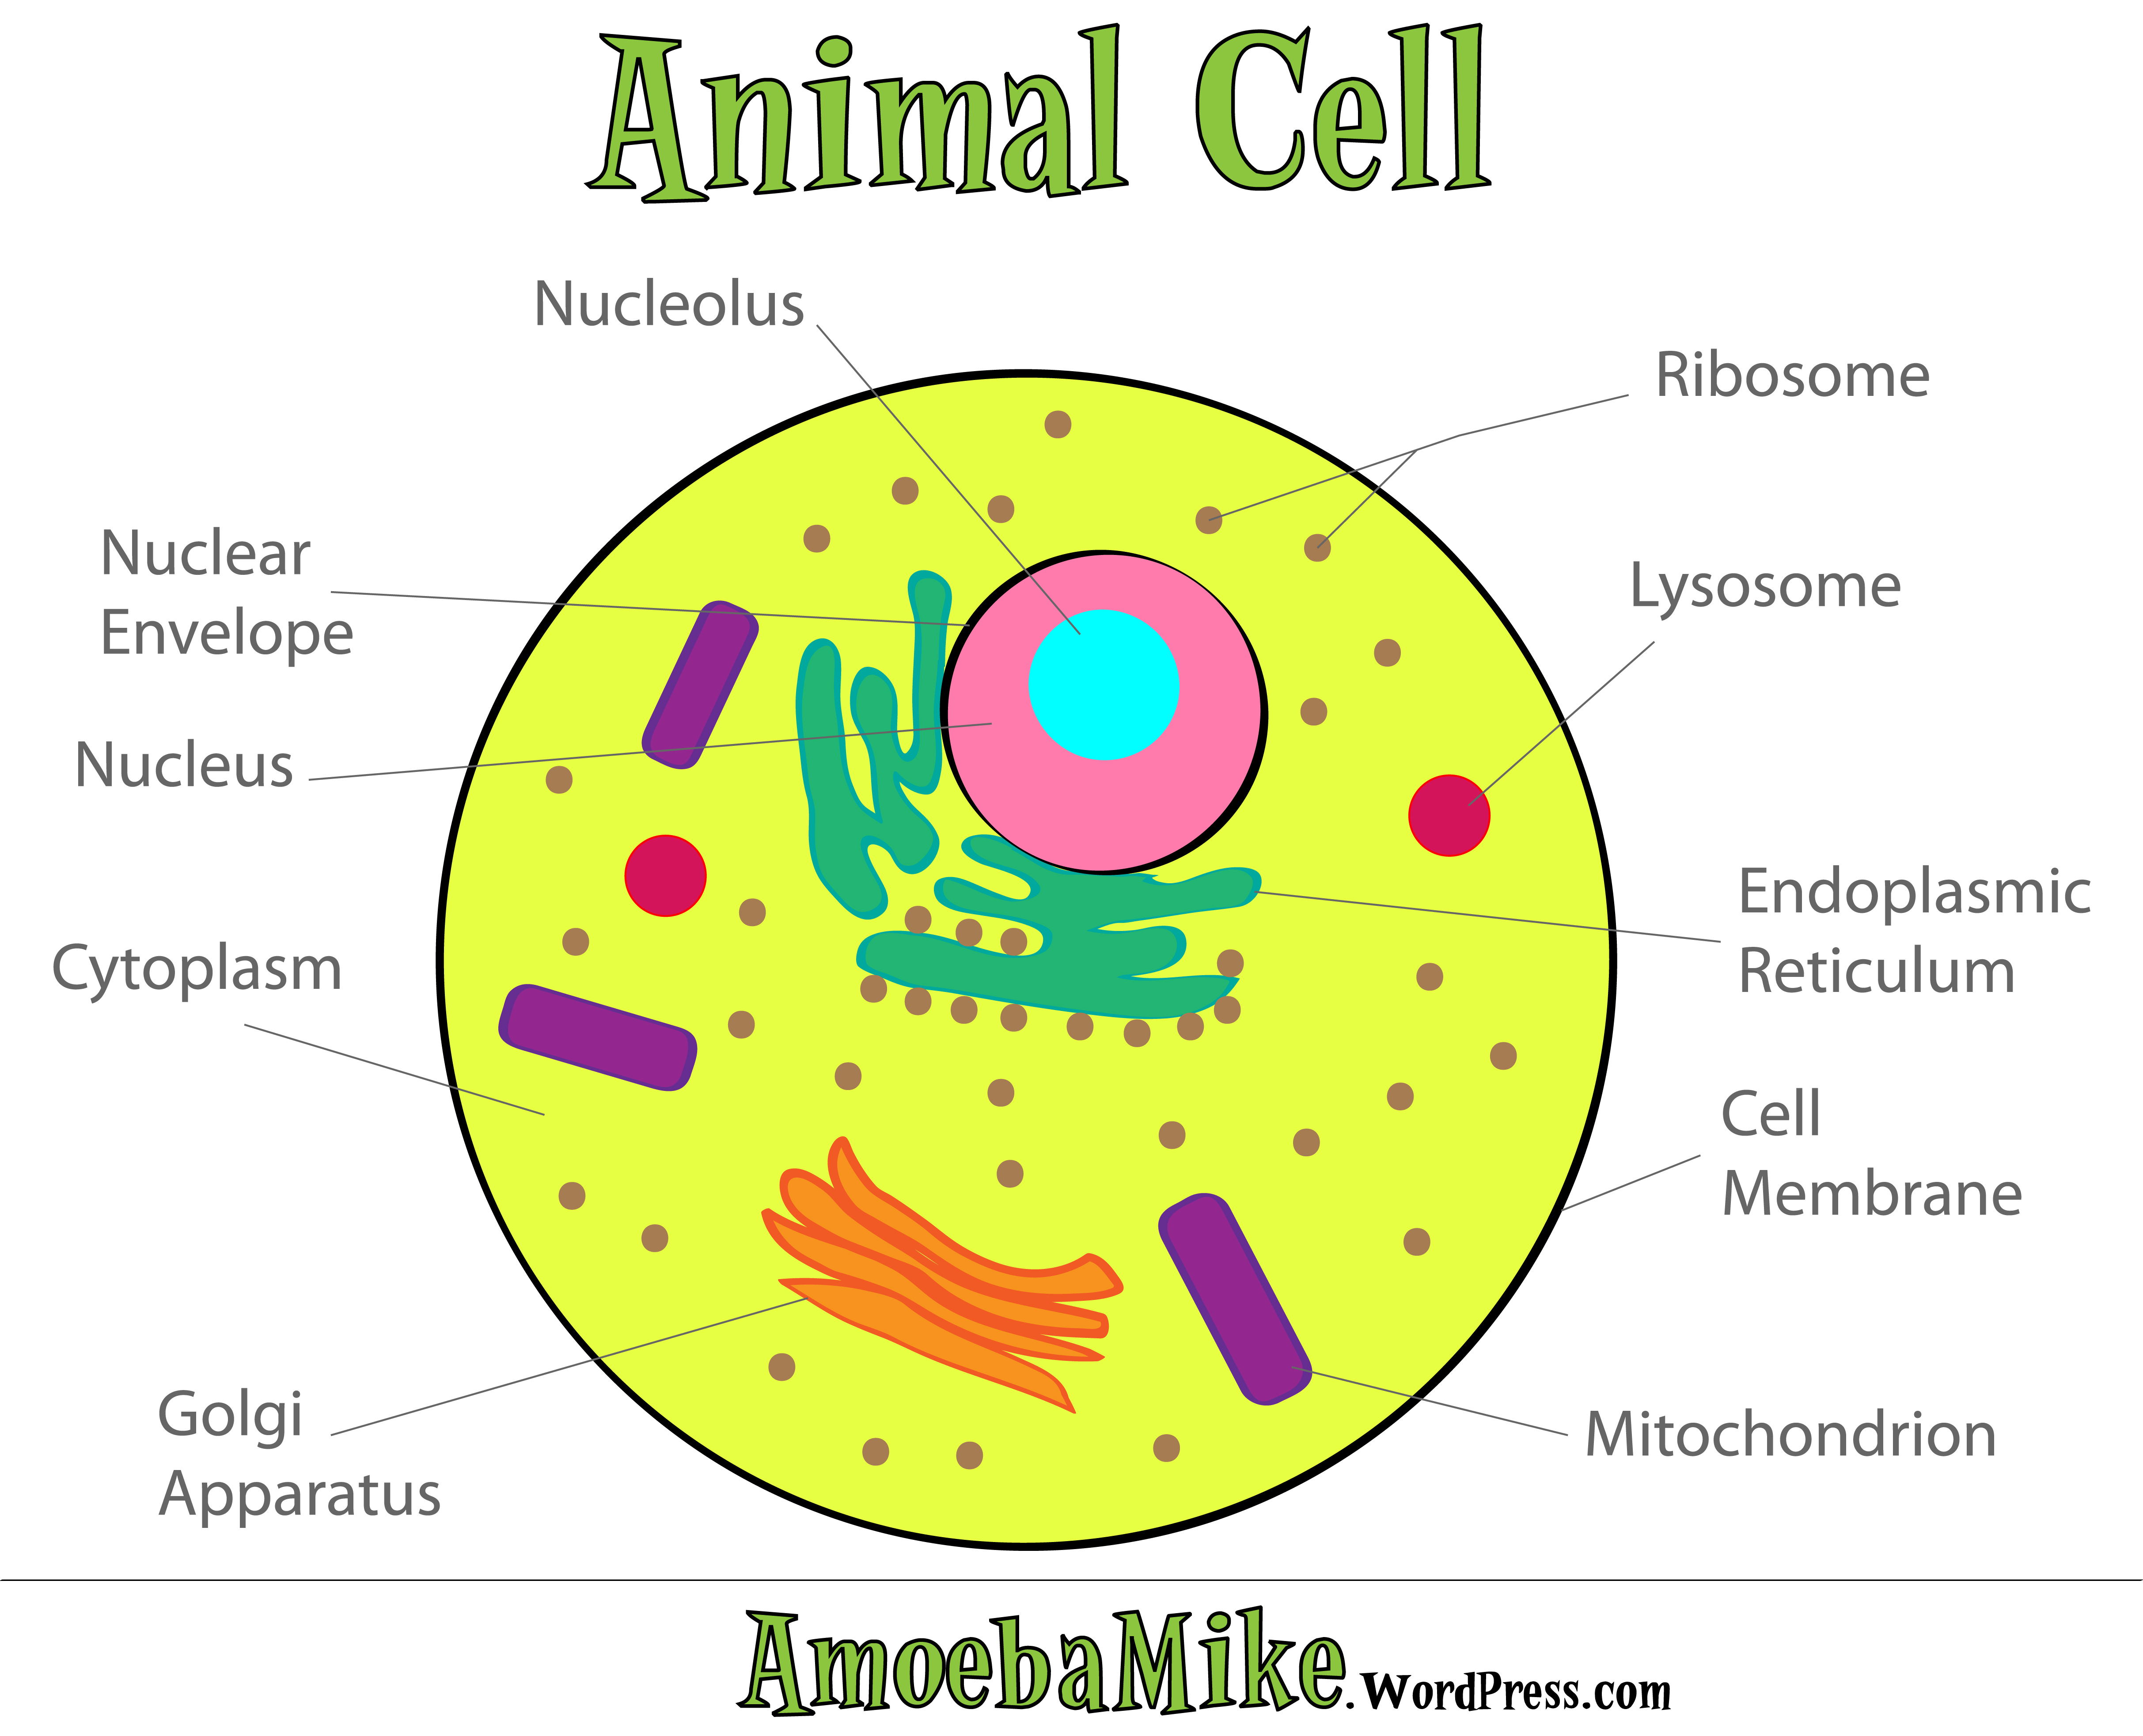 Animal Cell Diagram The Cell Amoebamike